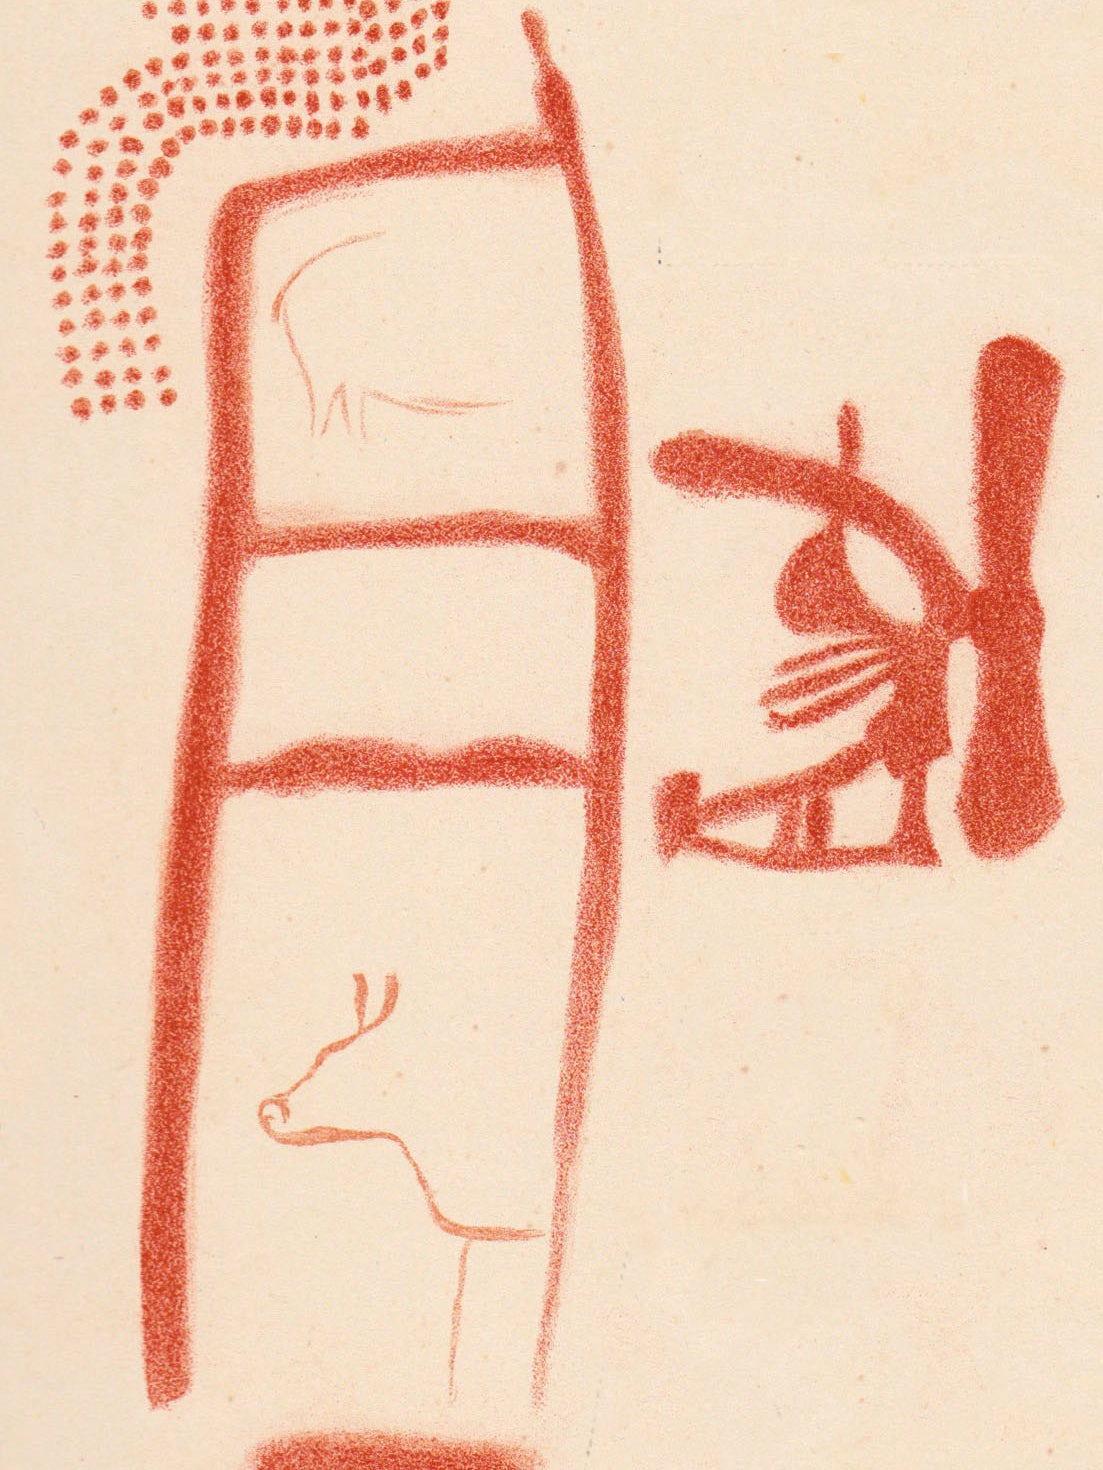 A close up of one of the paintings. The red ladder symbol has a minimum age of 64,000 years and has therefore been attributed to Neanderthals, but it is unclear if the animals and other symbols were painted later (Breuil et al)